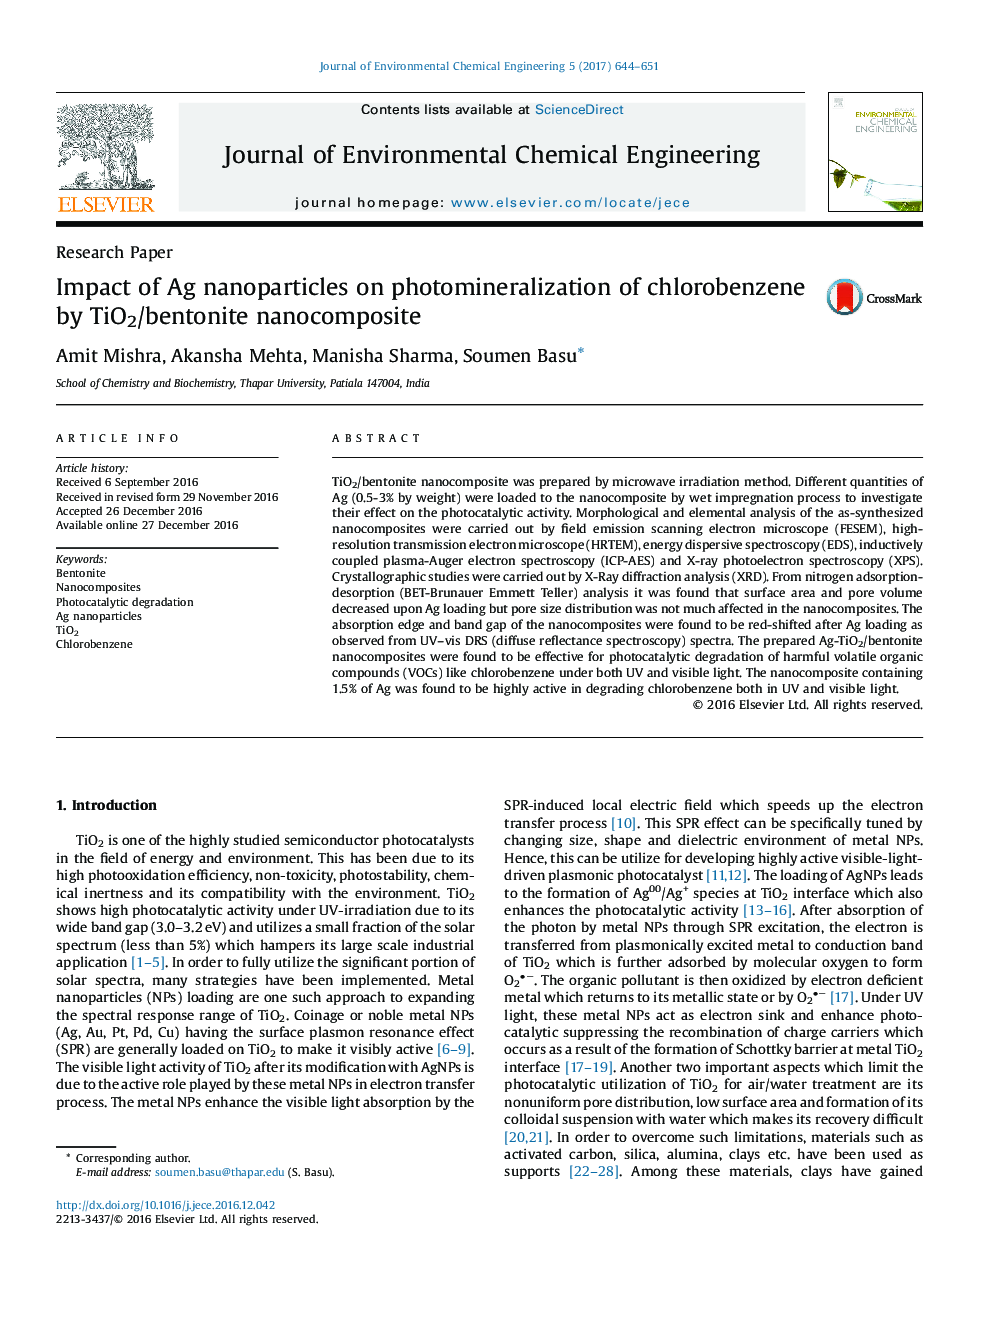 Impact of Ag nanoparticles on photomineralization of chlorobenzene by TiO2/bentonite nanocomposite